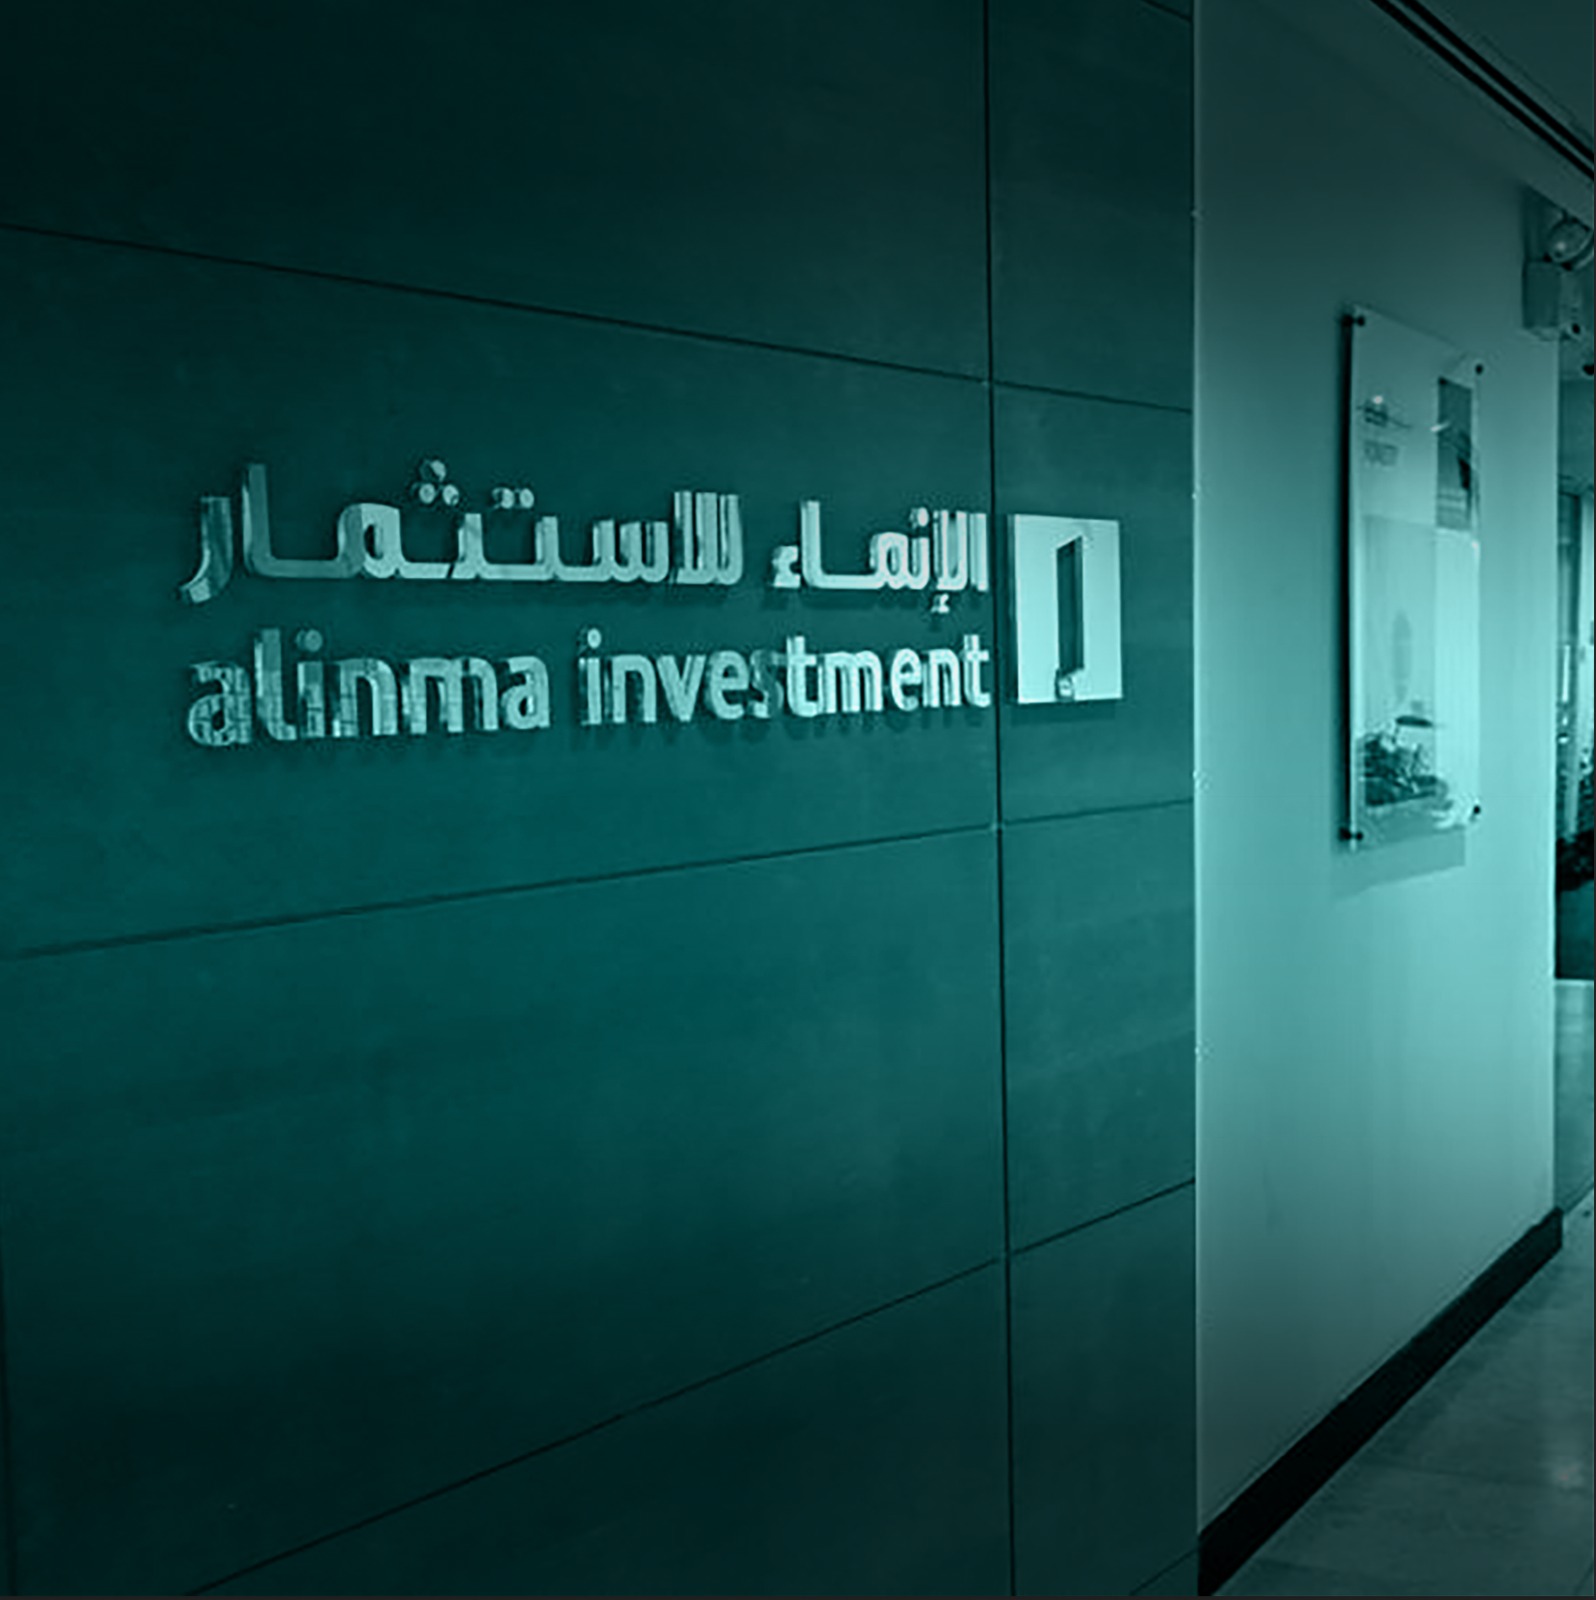 Alinma Investment Company announces the Offering of Ghida Al-Sultan Company and the listing of its shares on the Parallel Market (“NOMU”).